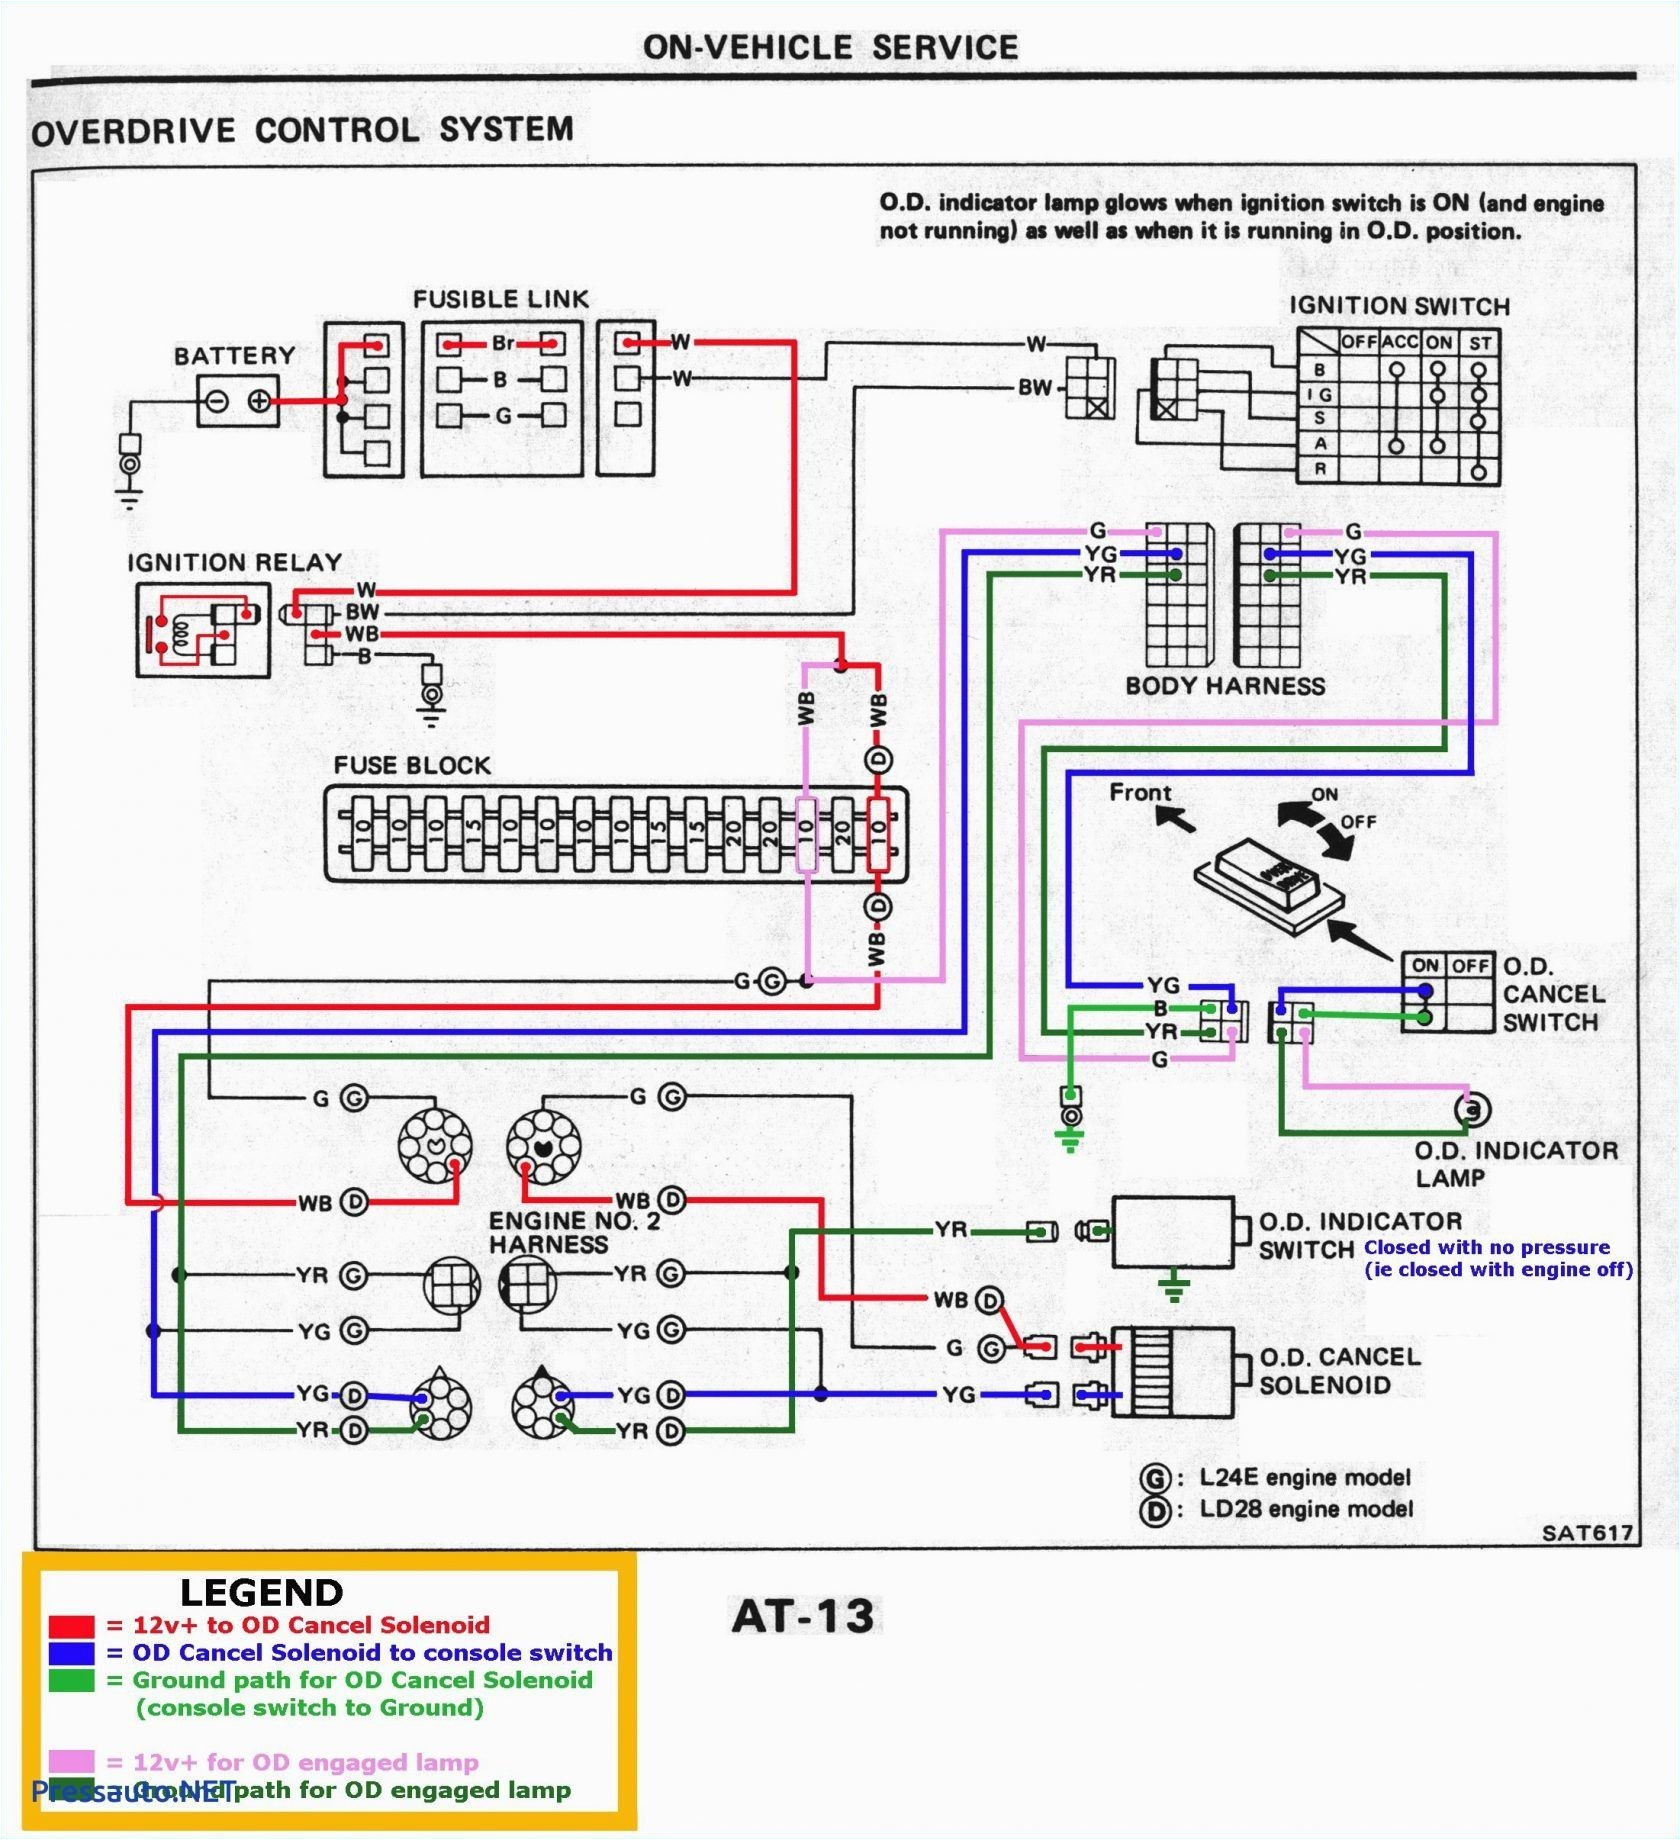 torque 8 wire diagram another blog about wiring diagram torque 8 wire diagram